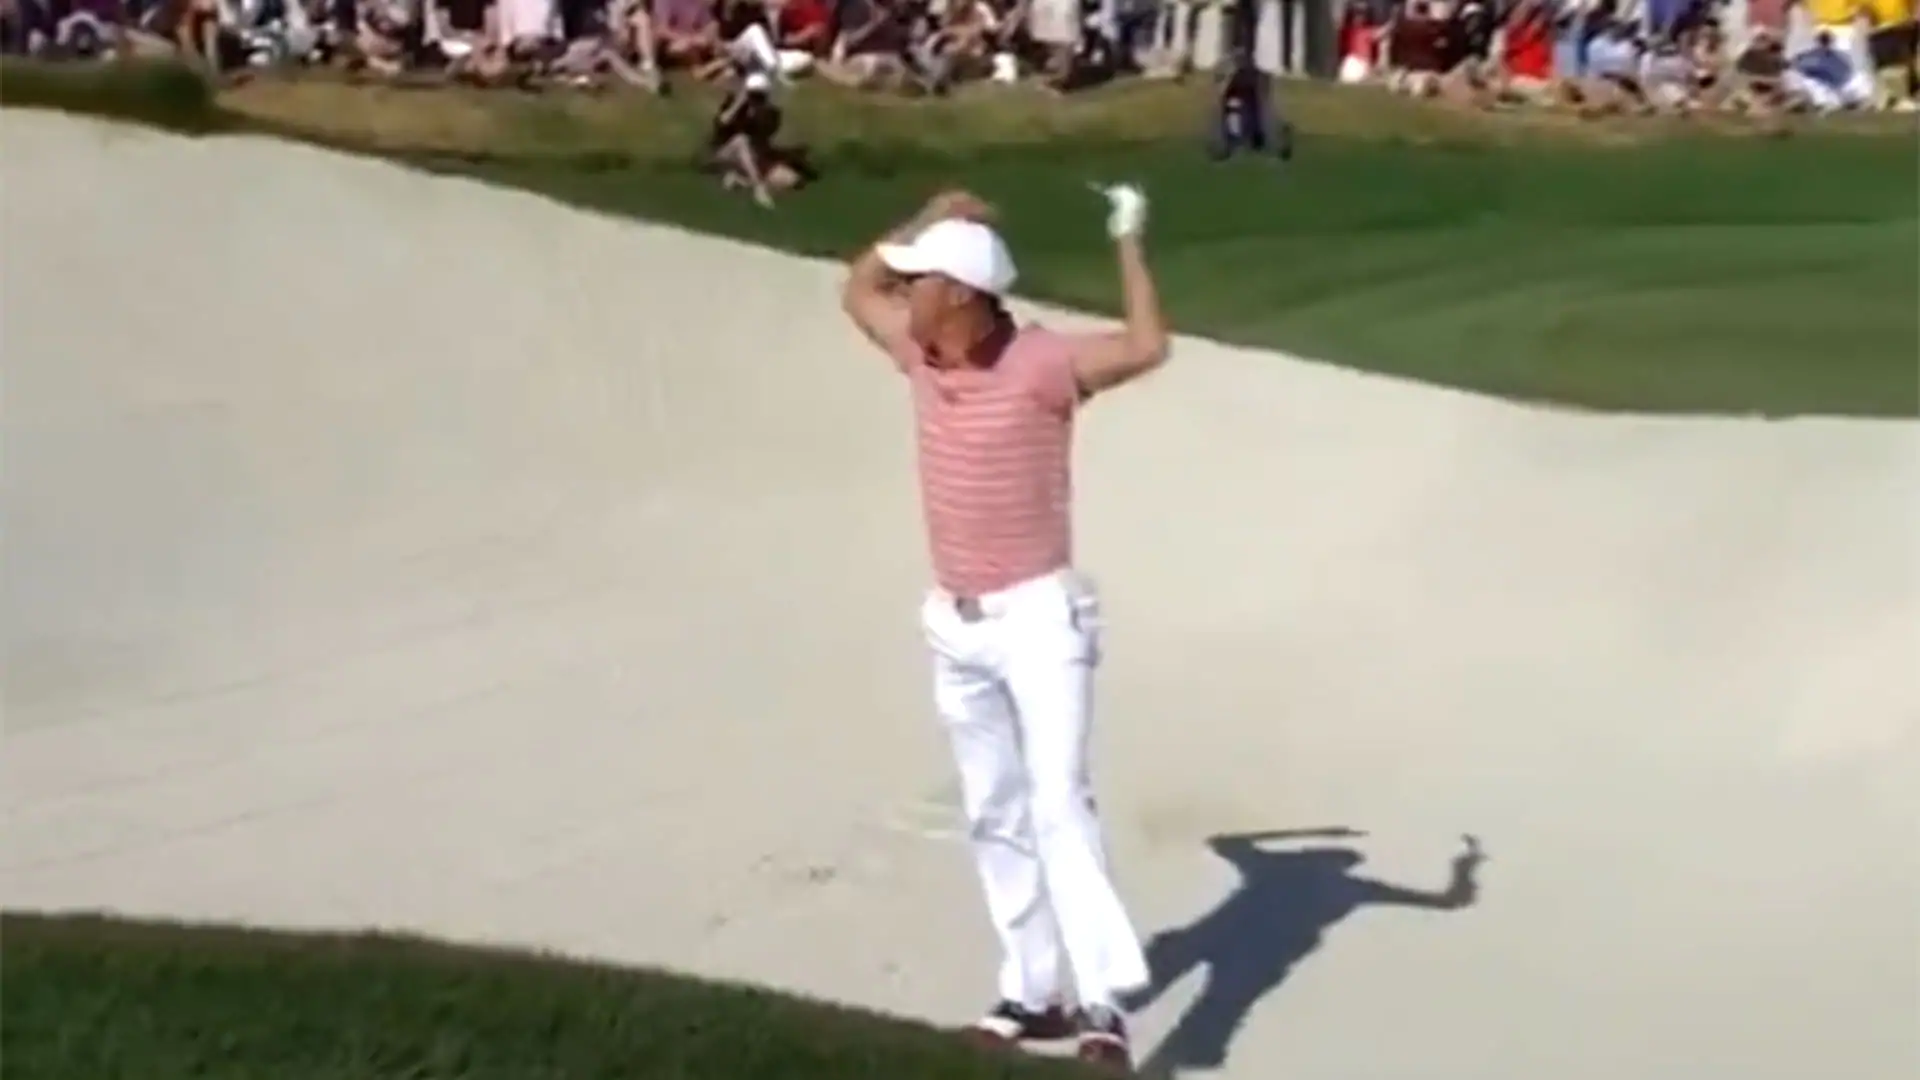 Watch: Thomas holes shot from bunker, goes bonkers